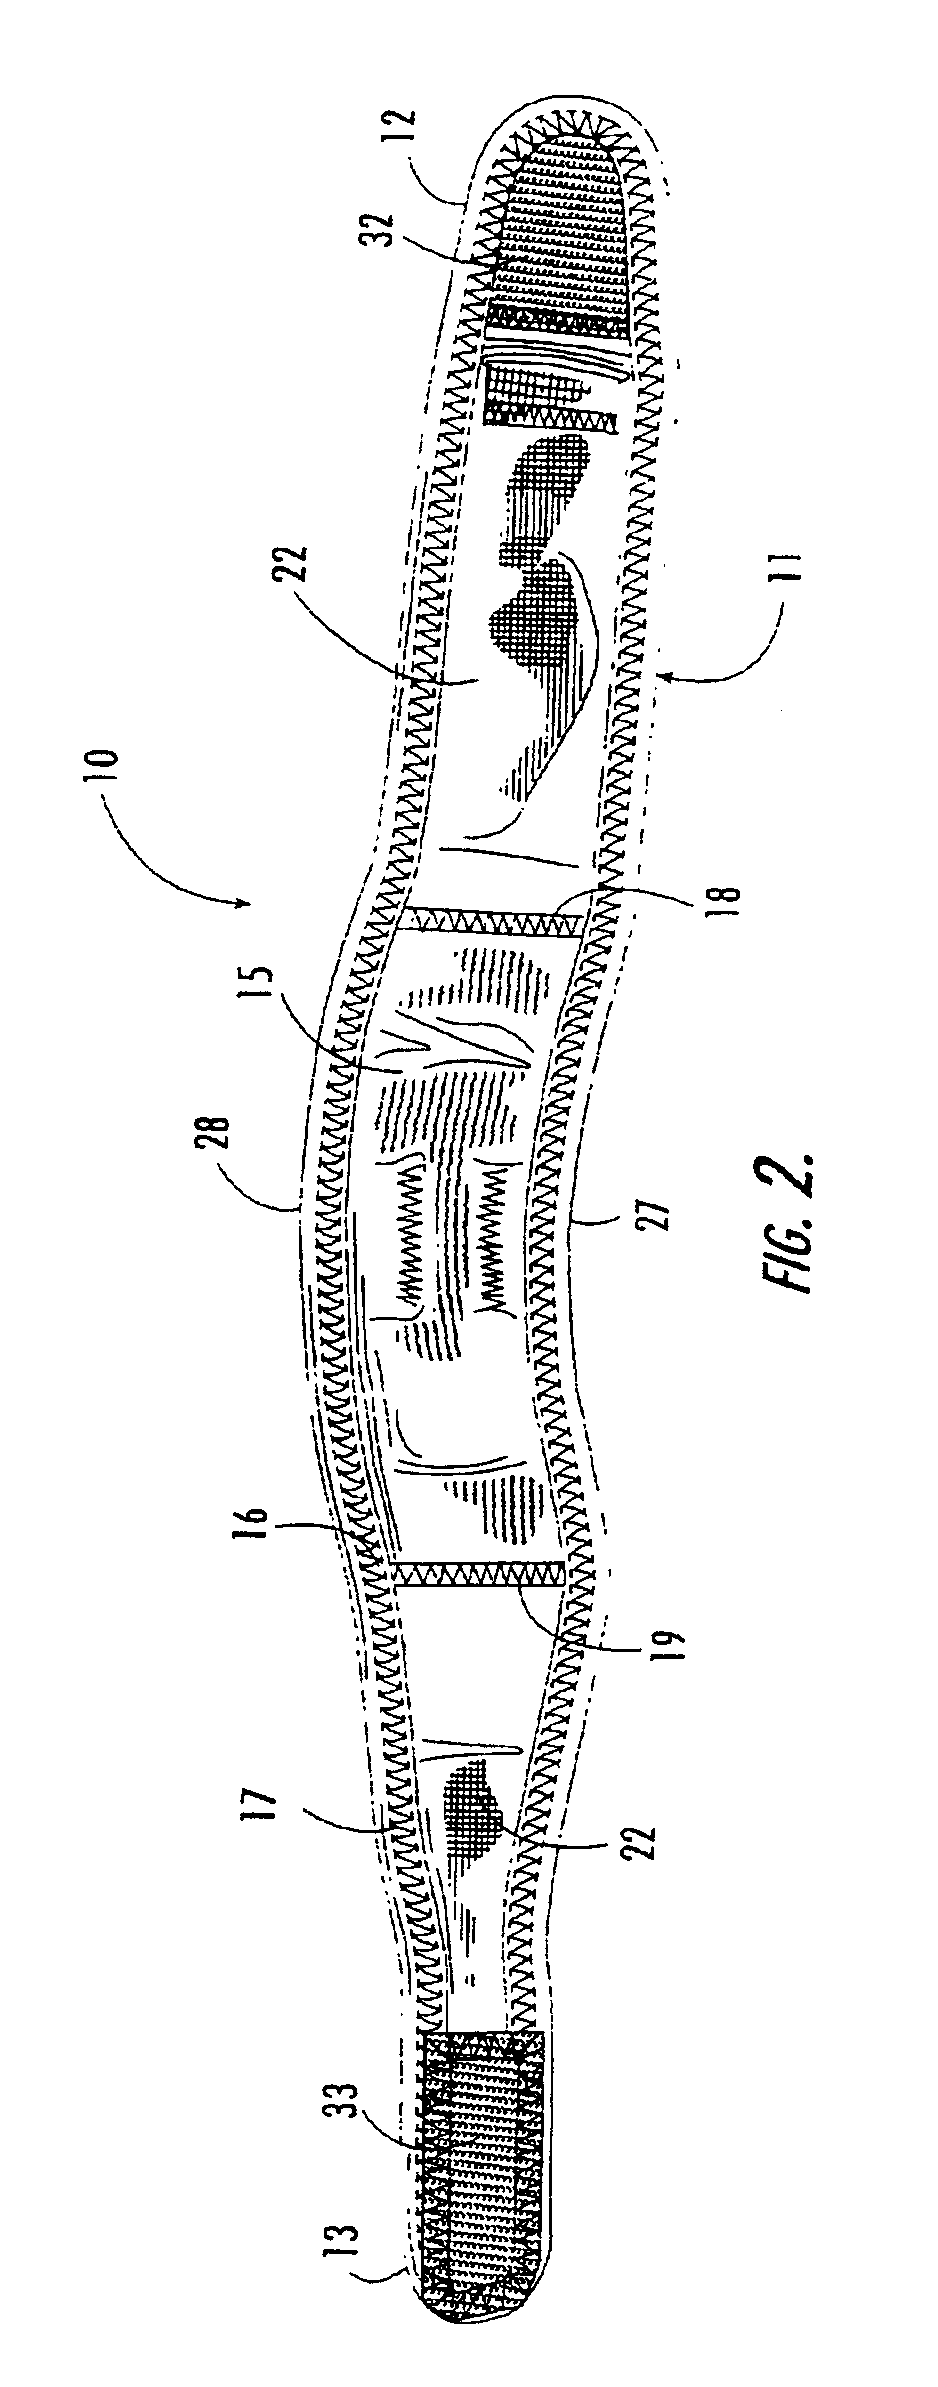 Knee support device for applying radial pressure